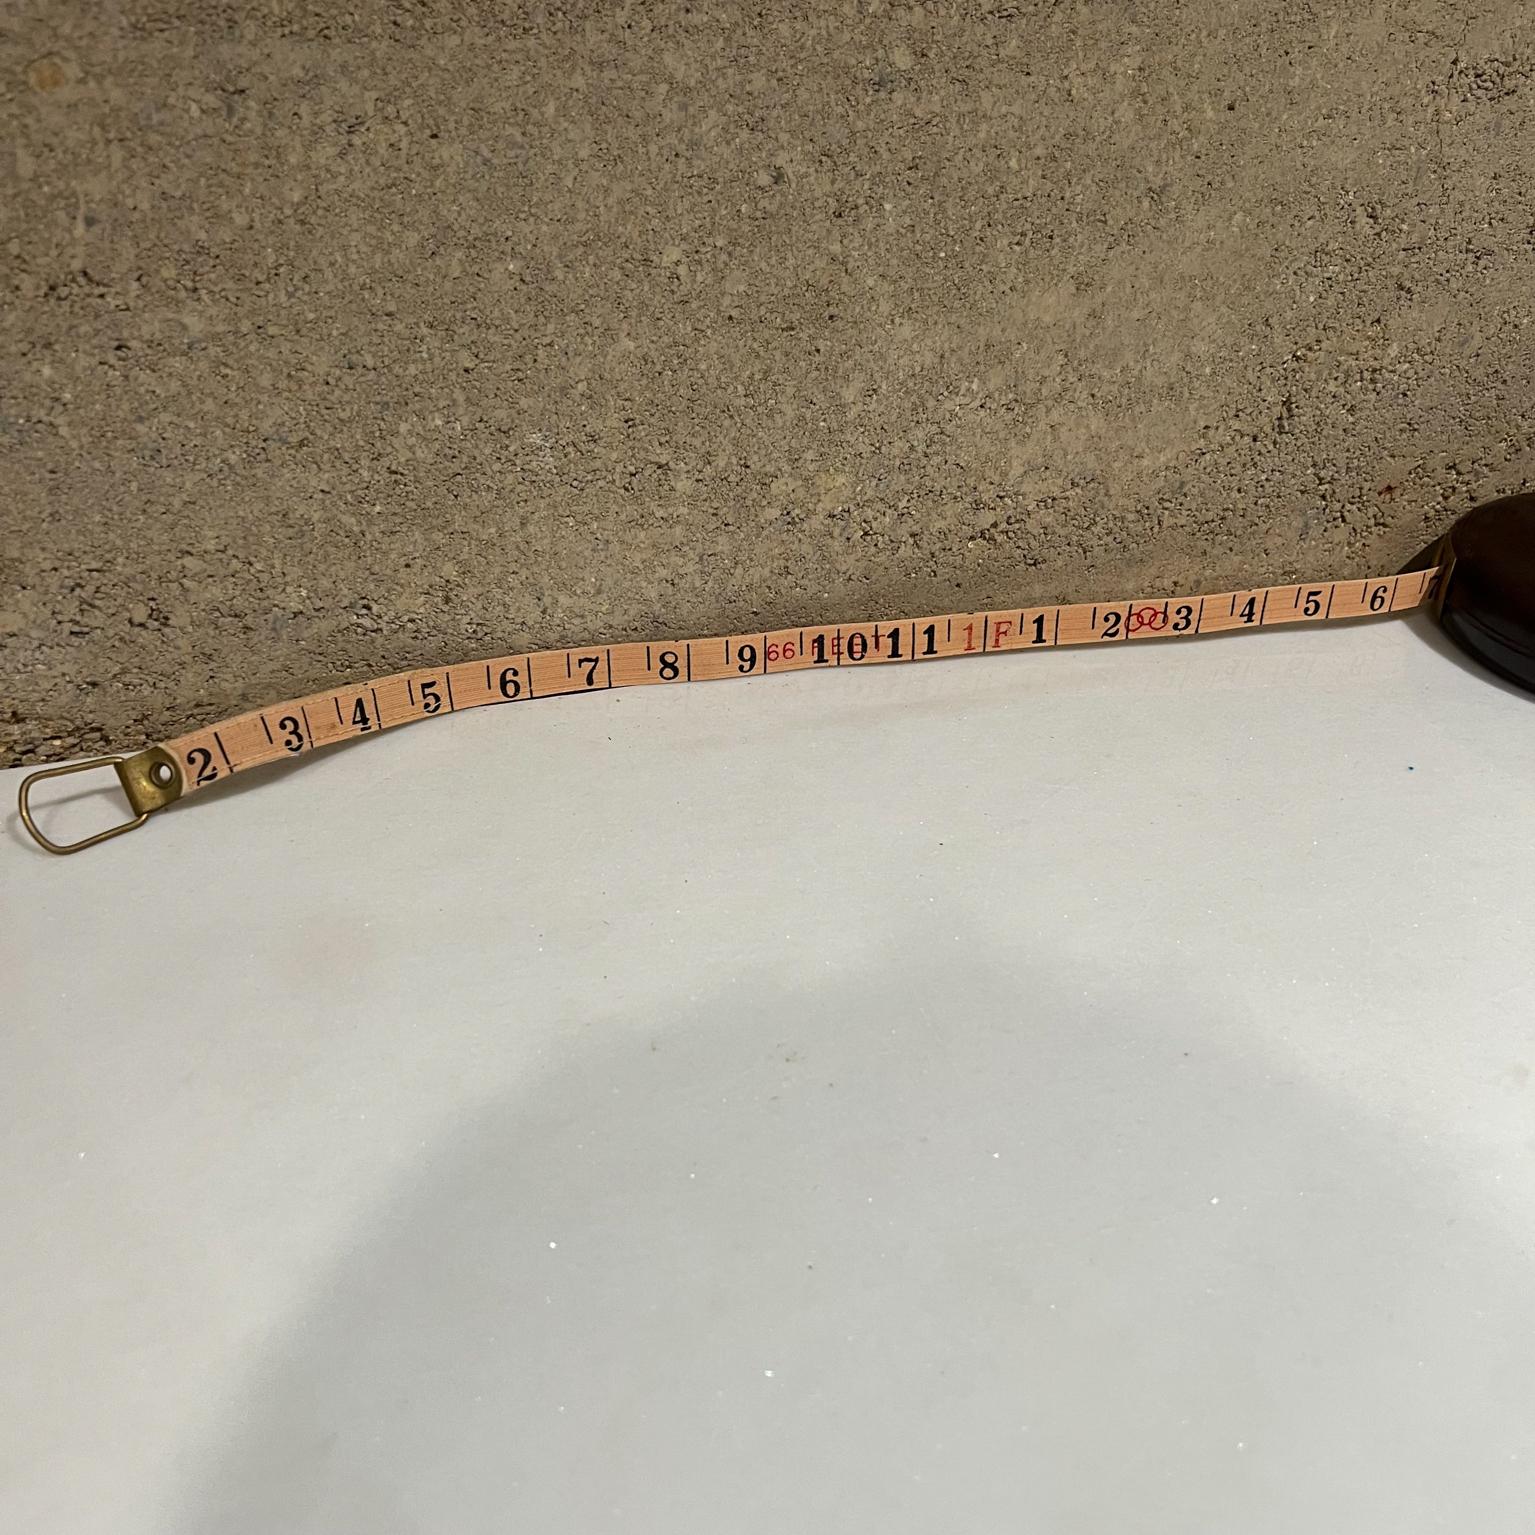 1950s Vintage Tricle Bakelite Olympic Tape Measure Peoples Republic of China In Good Condition For Sale In Chula Vista, CA